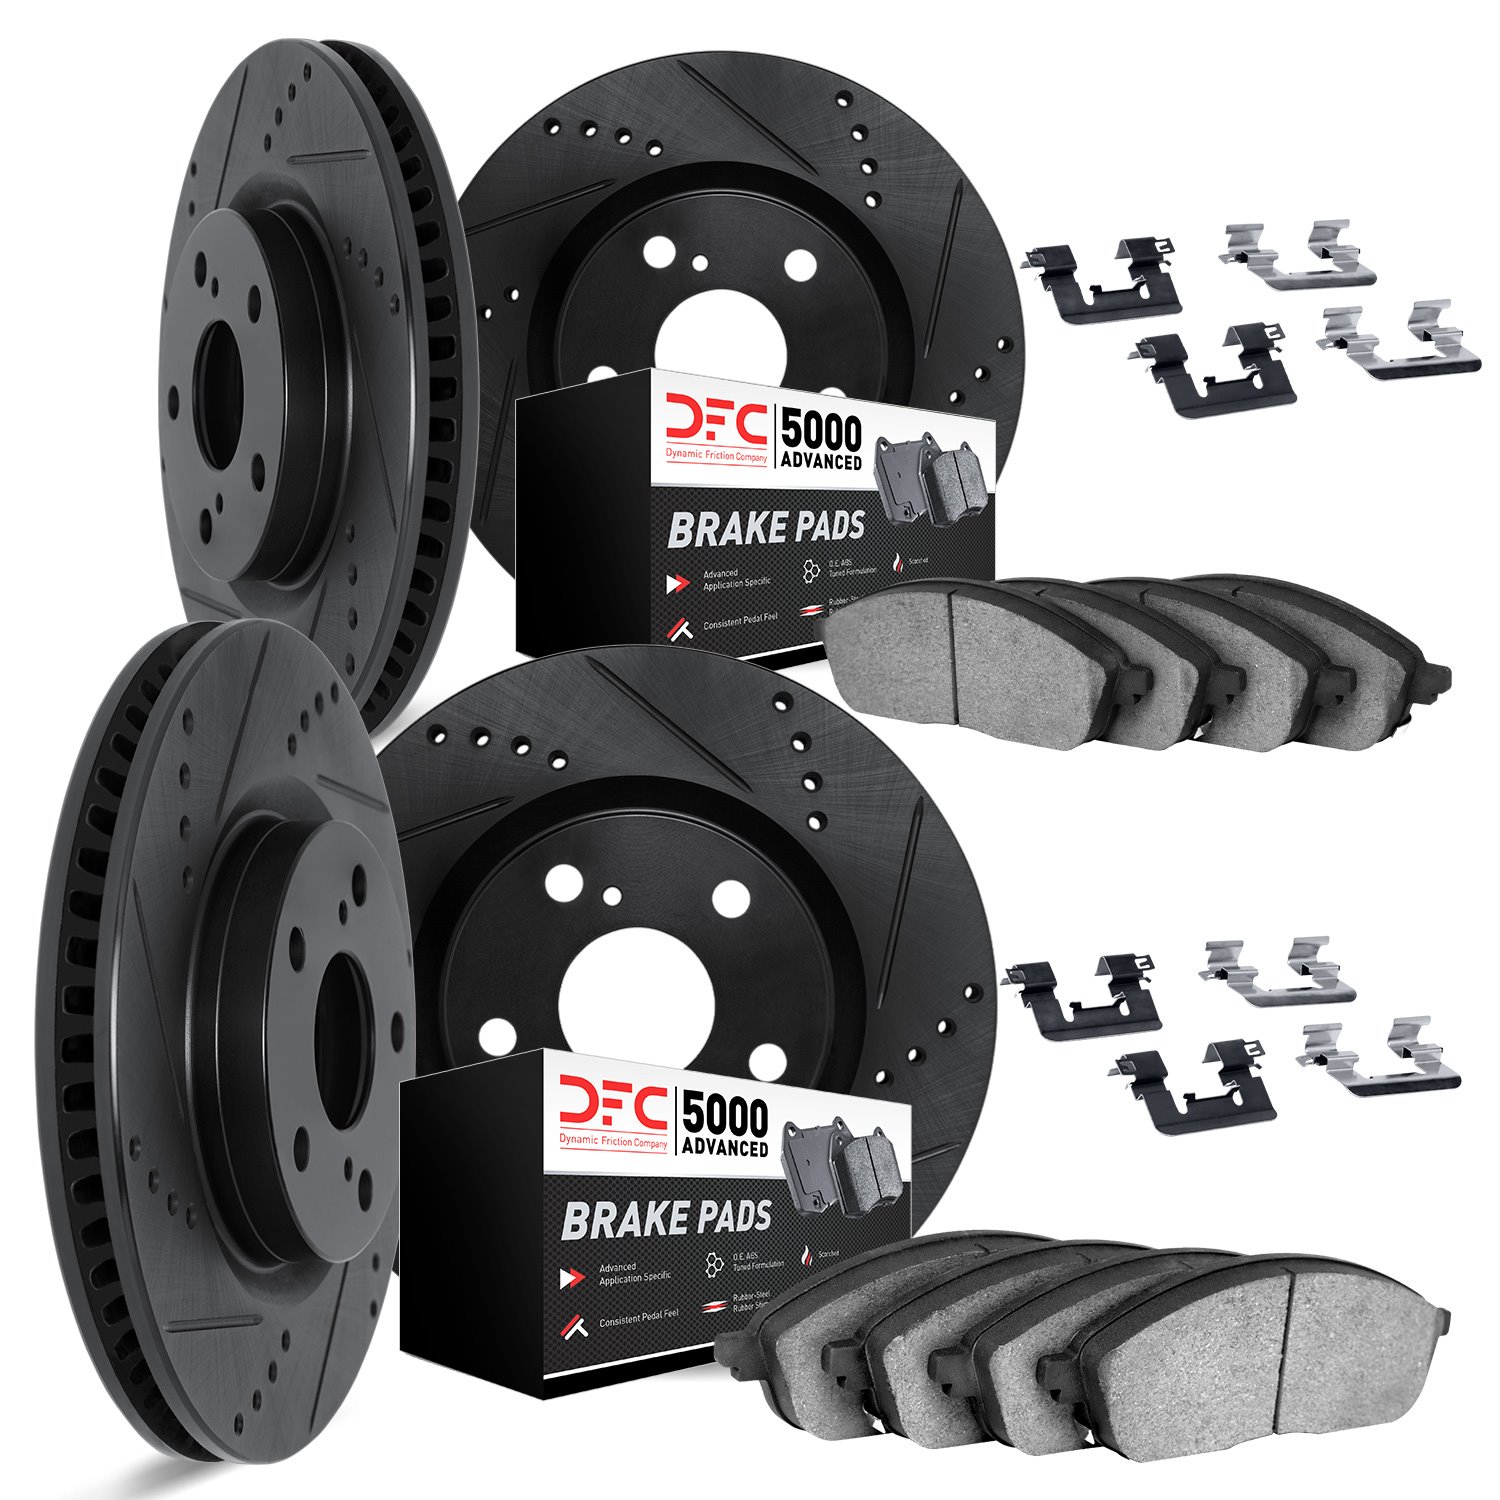 8514-27016 Drilled/Slotted Brake Rotors w/5000 Advanced Brake Pads Kit & Hardware [Black], 2017-2019 Volvo, Position: Front and